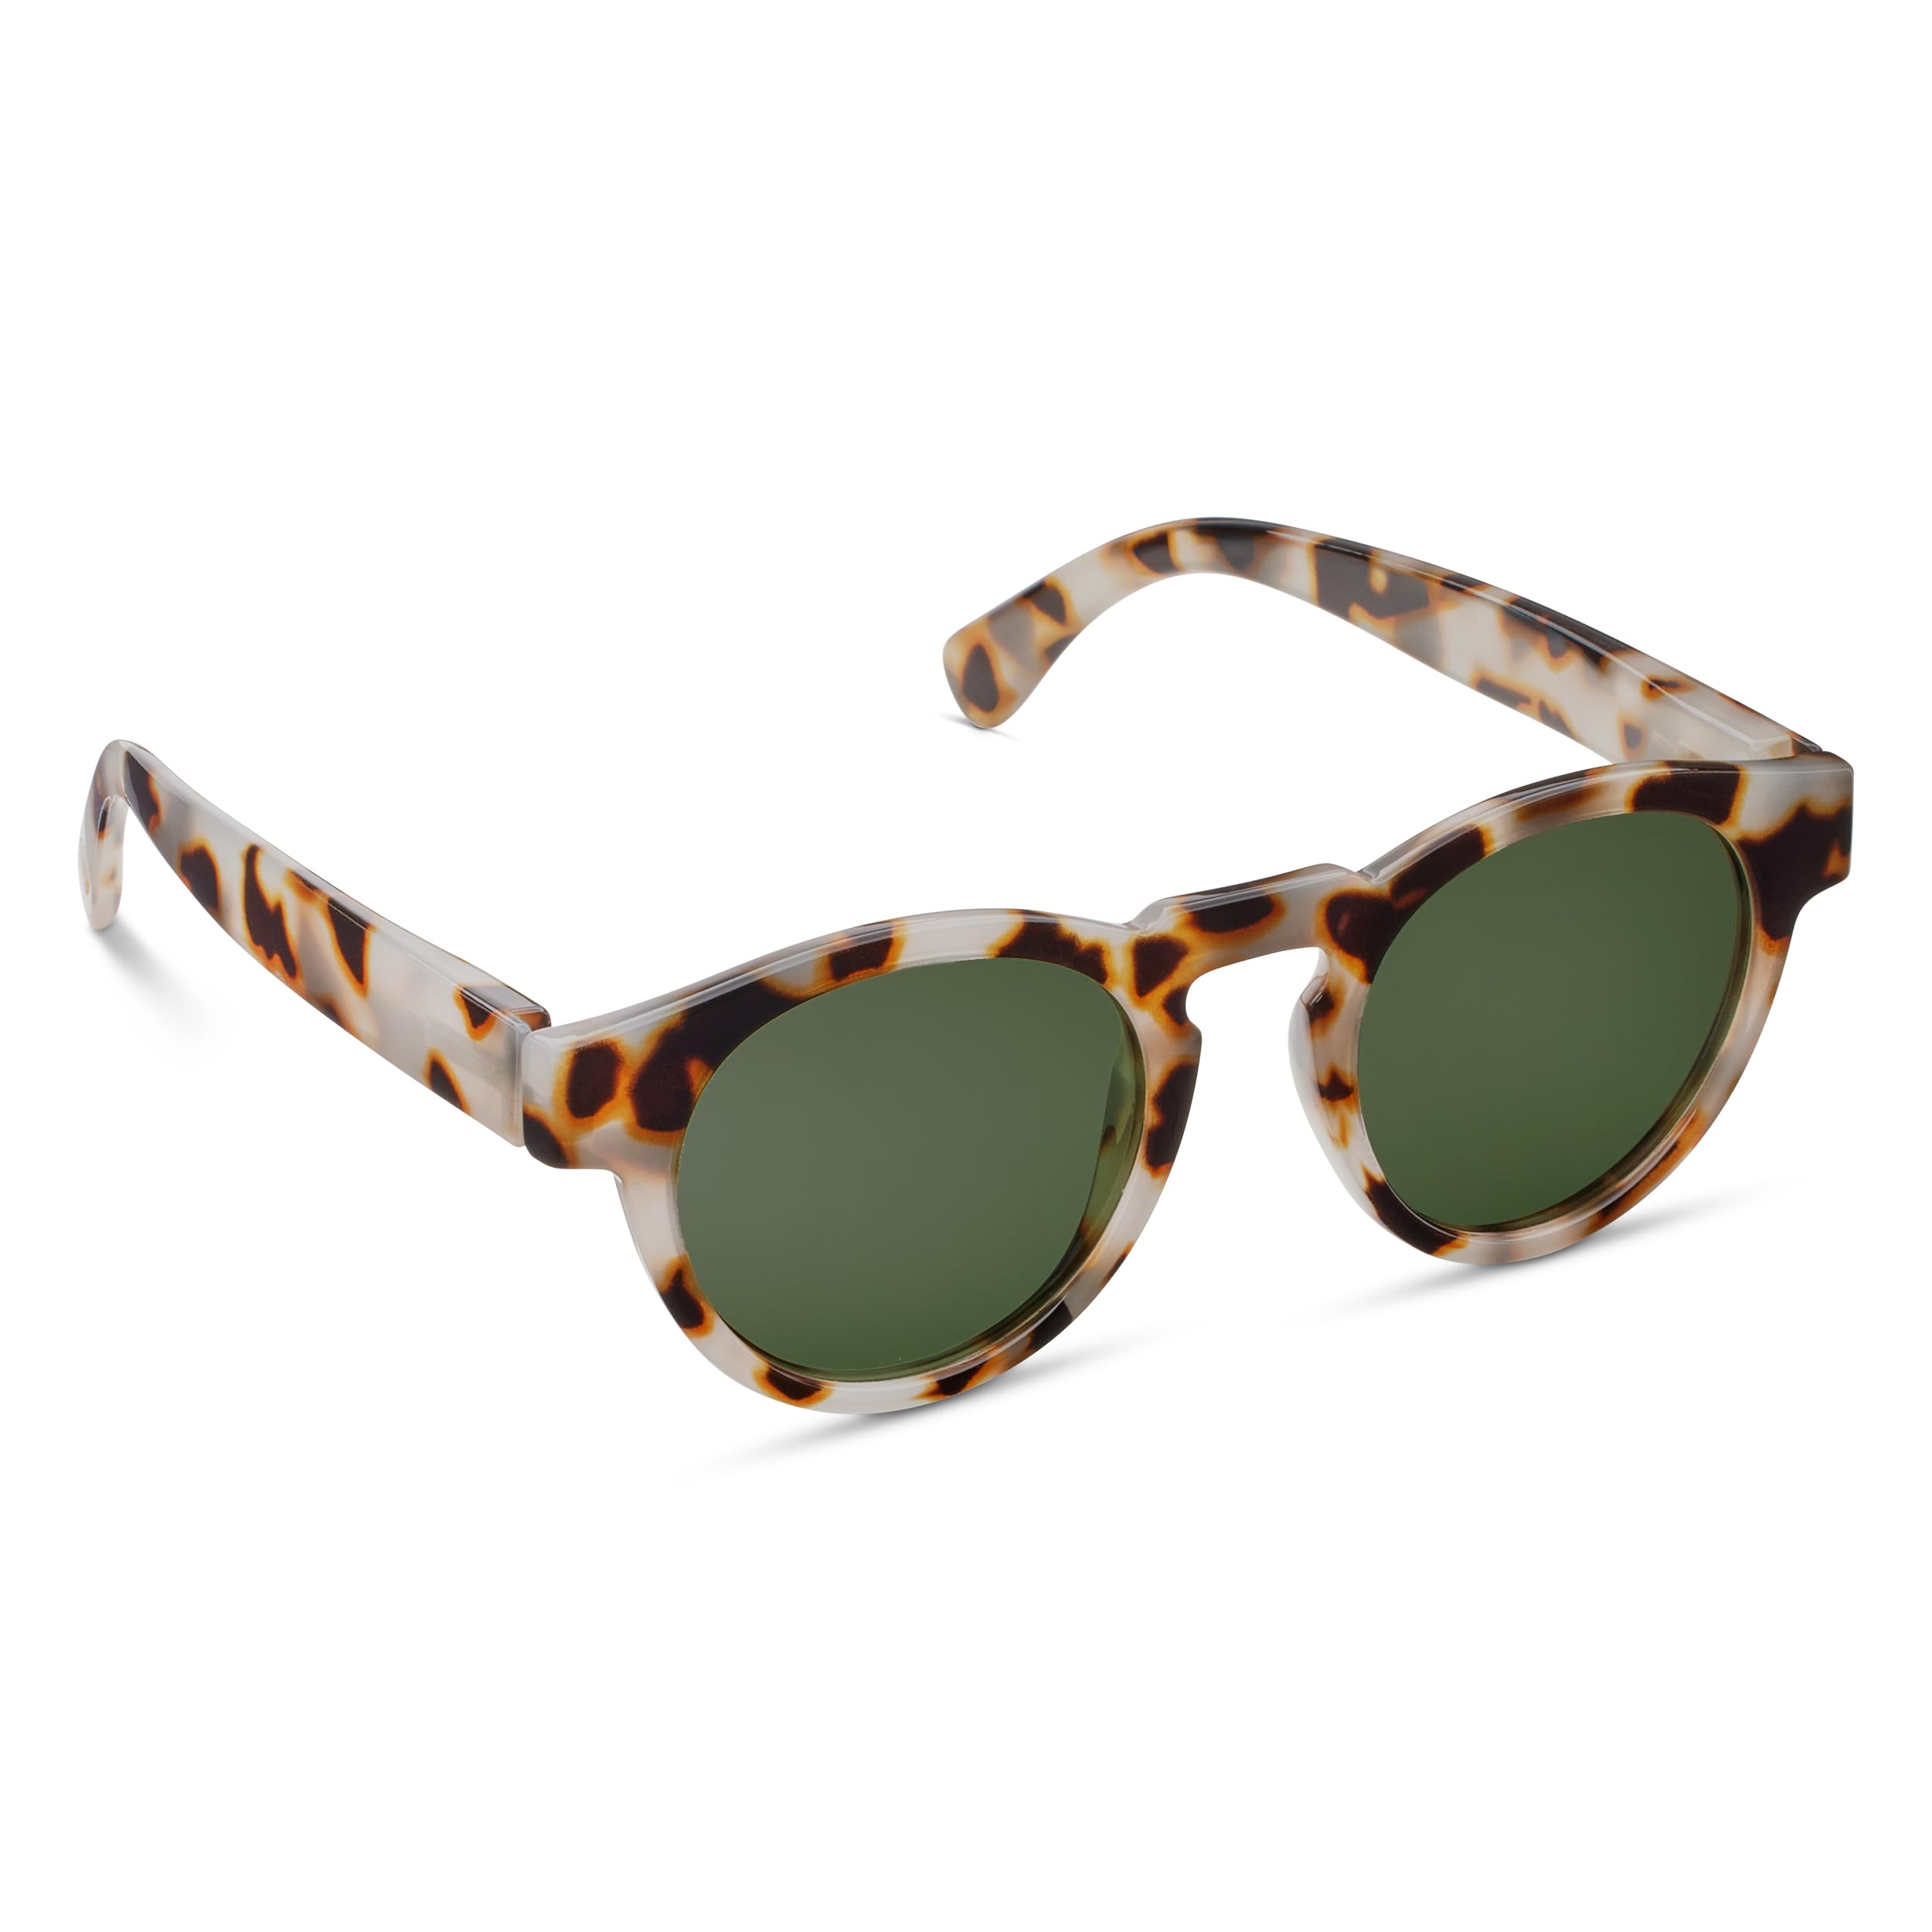 Peepers by PeeperSpecs Women's Nantucket-Reading Sunglasses Round, Chai Tortoise, 2.00 + 2